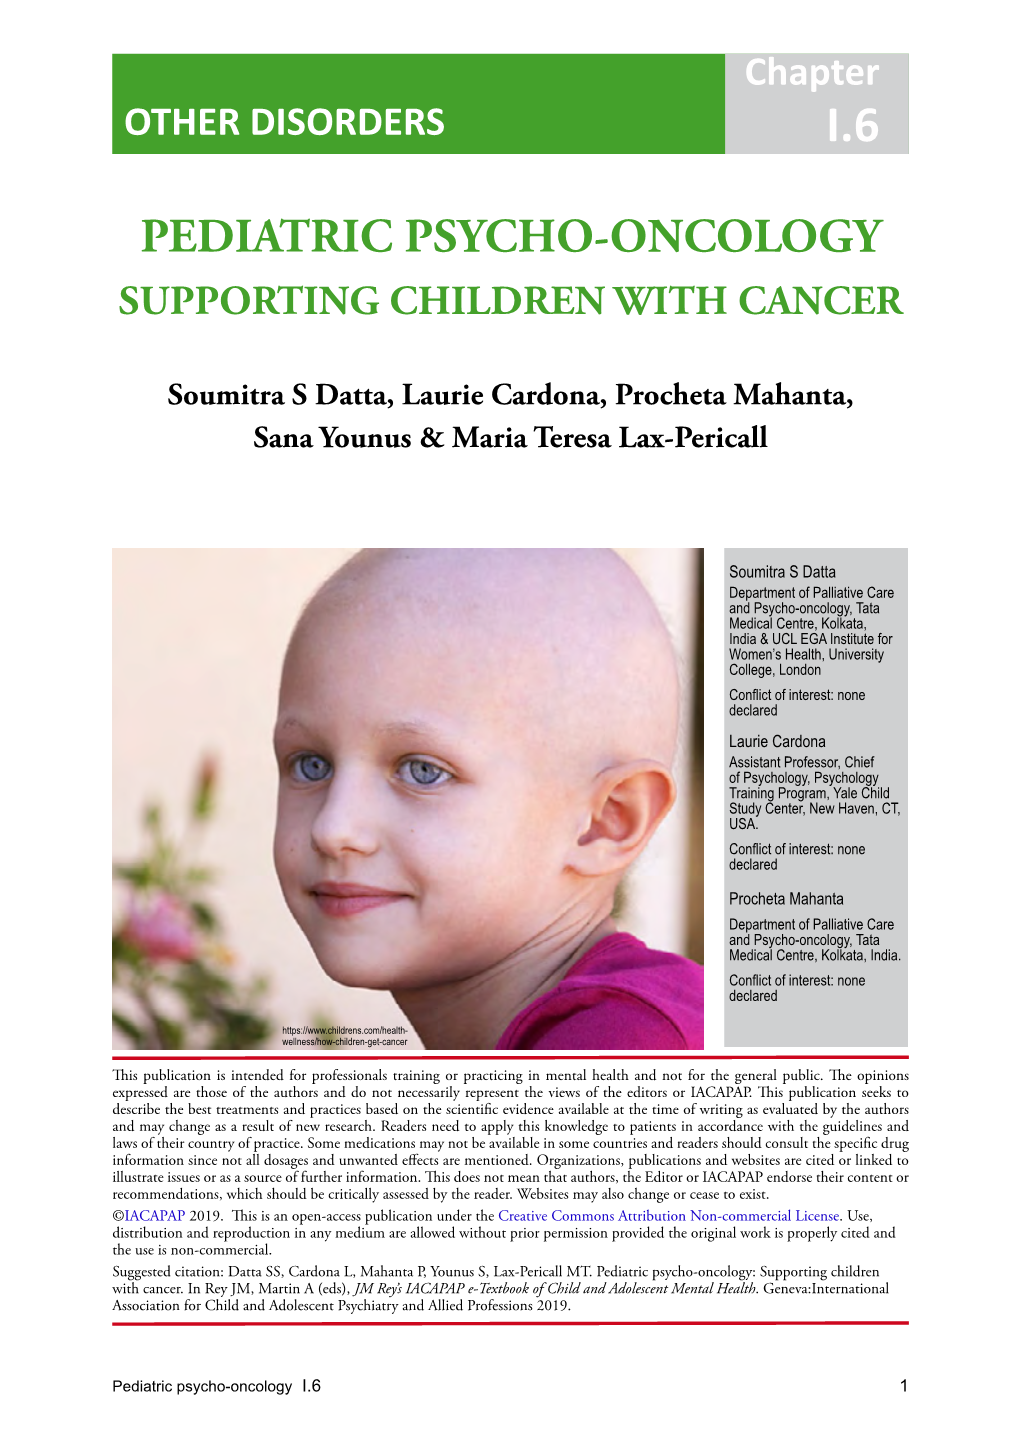 Pediatric Psycho-Oncology Supporting Children with Cancer